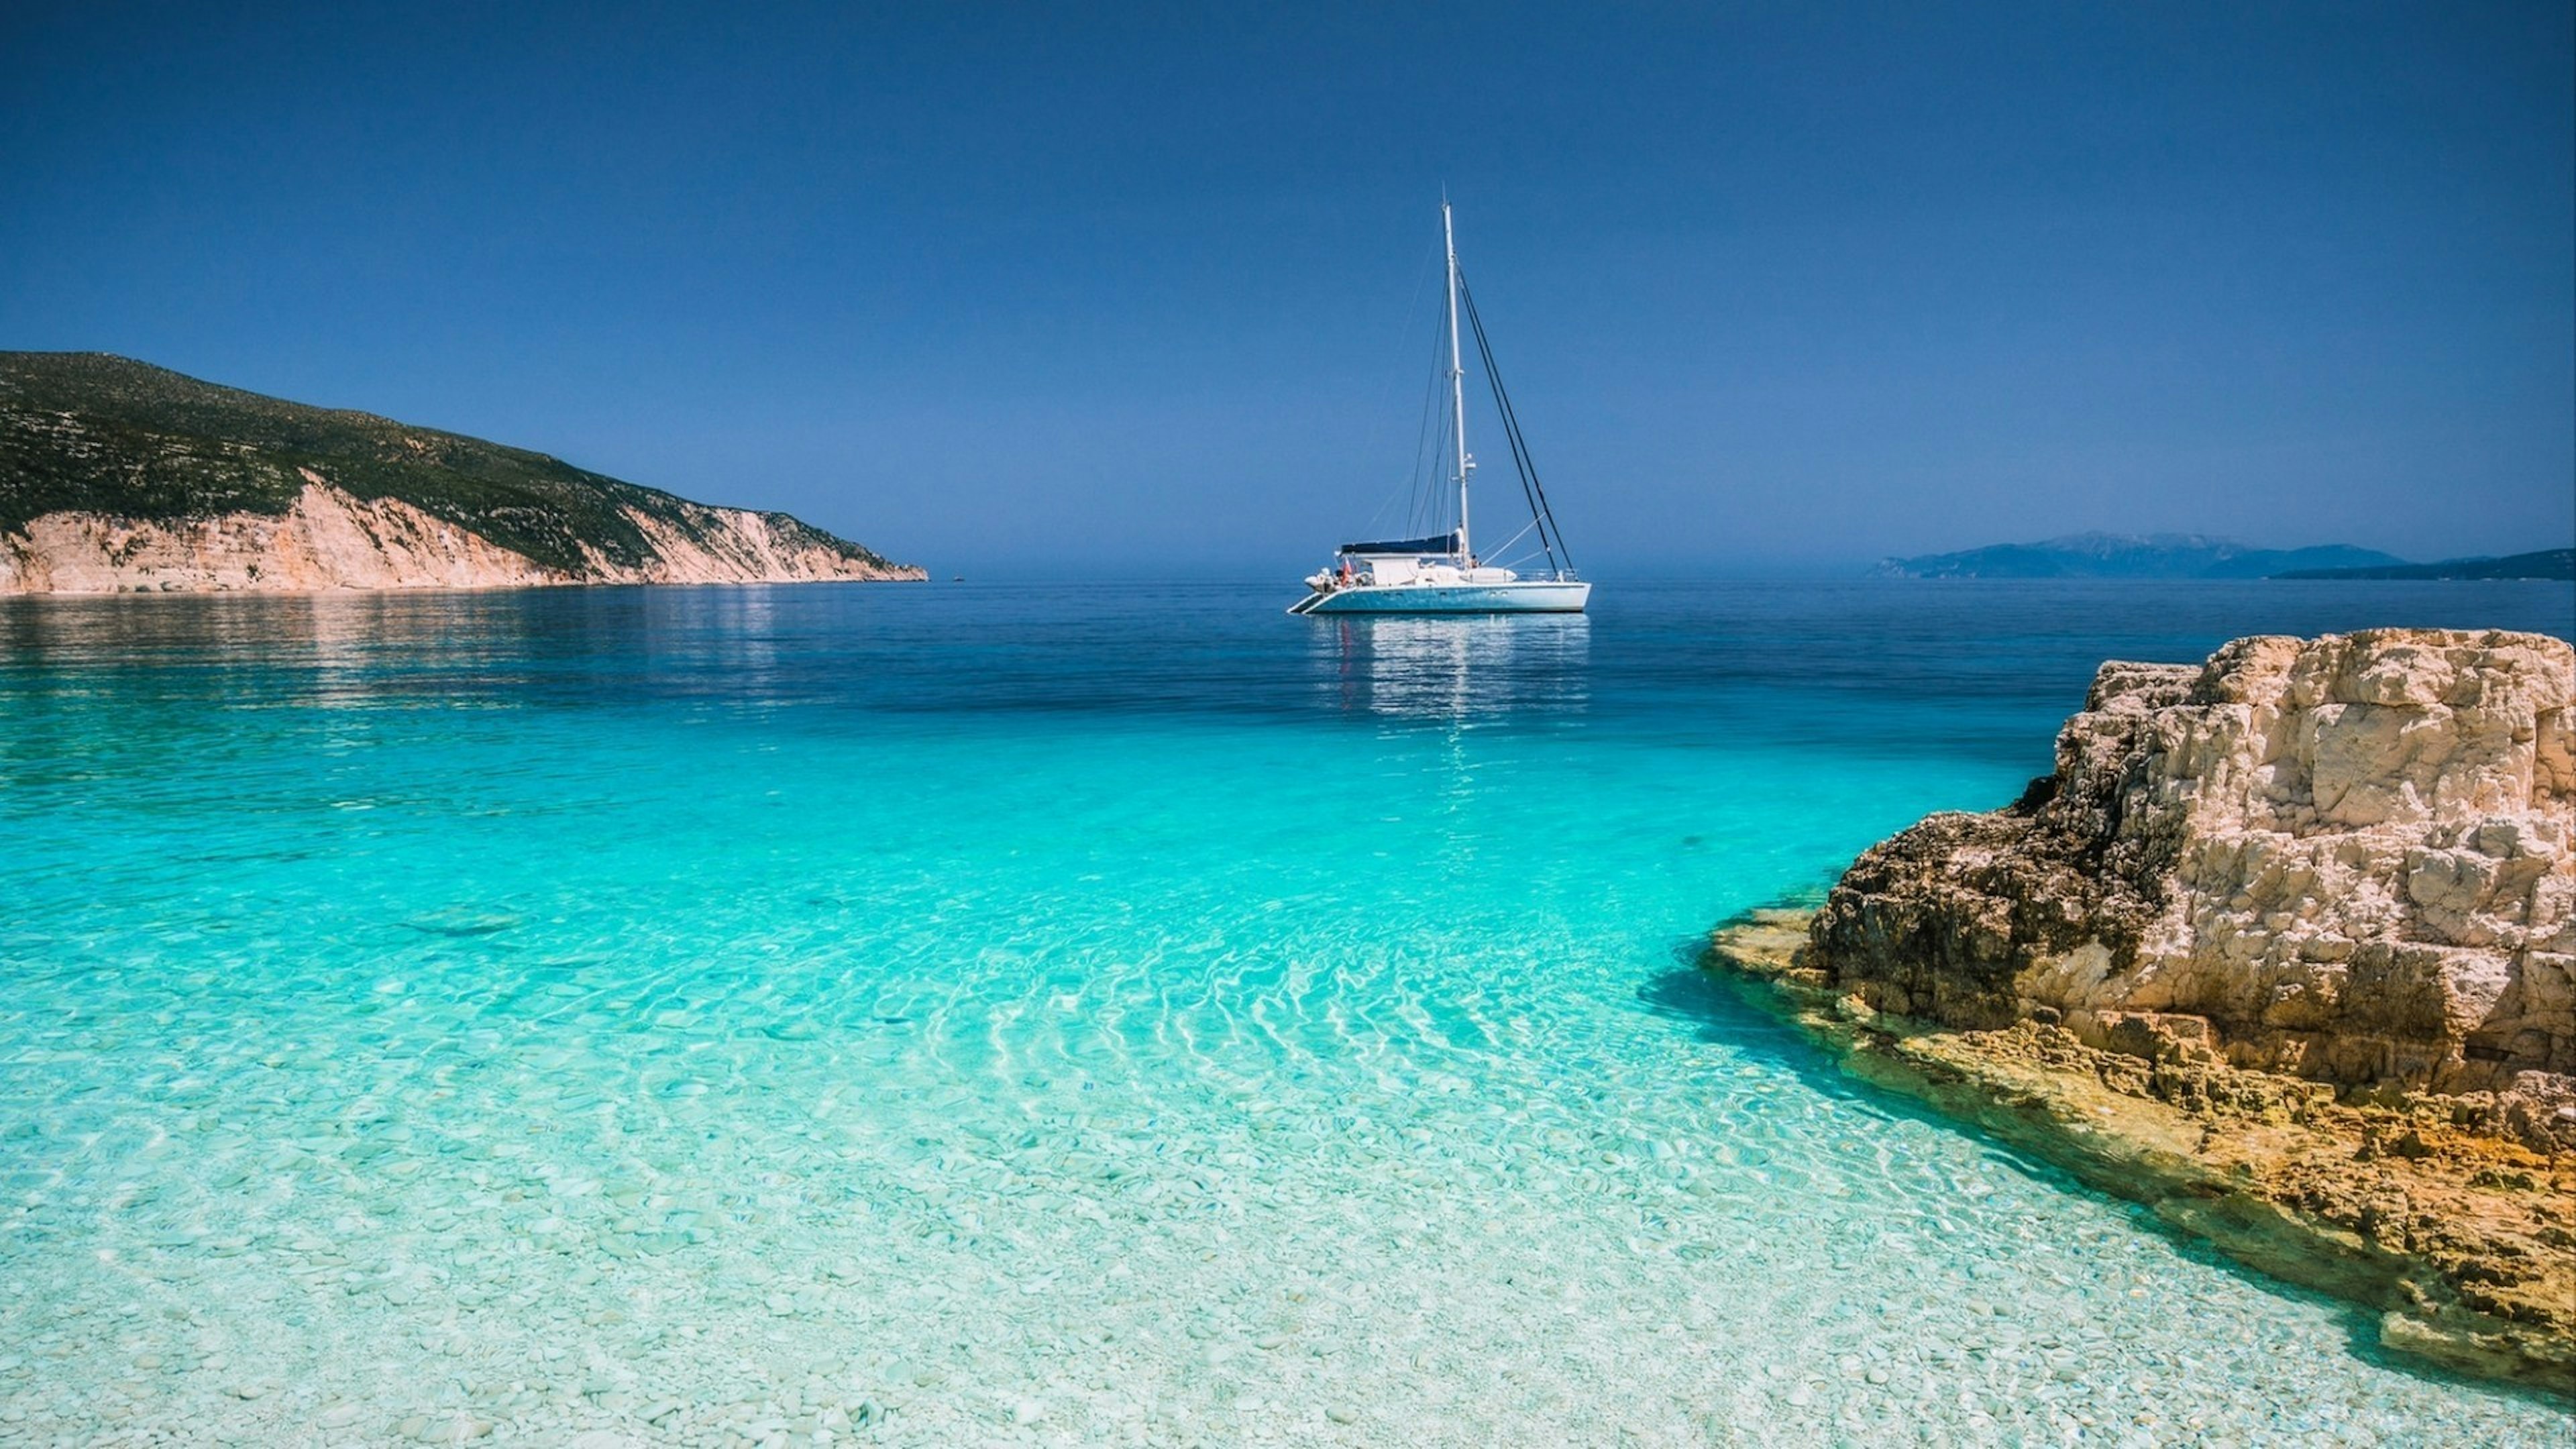 beautiful view of yacht off shore